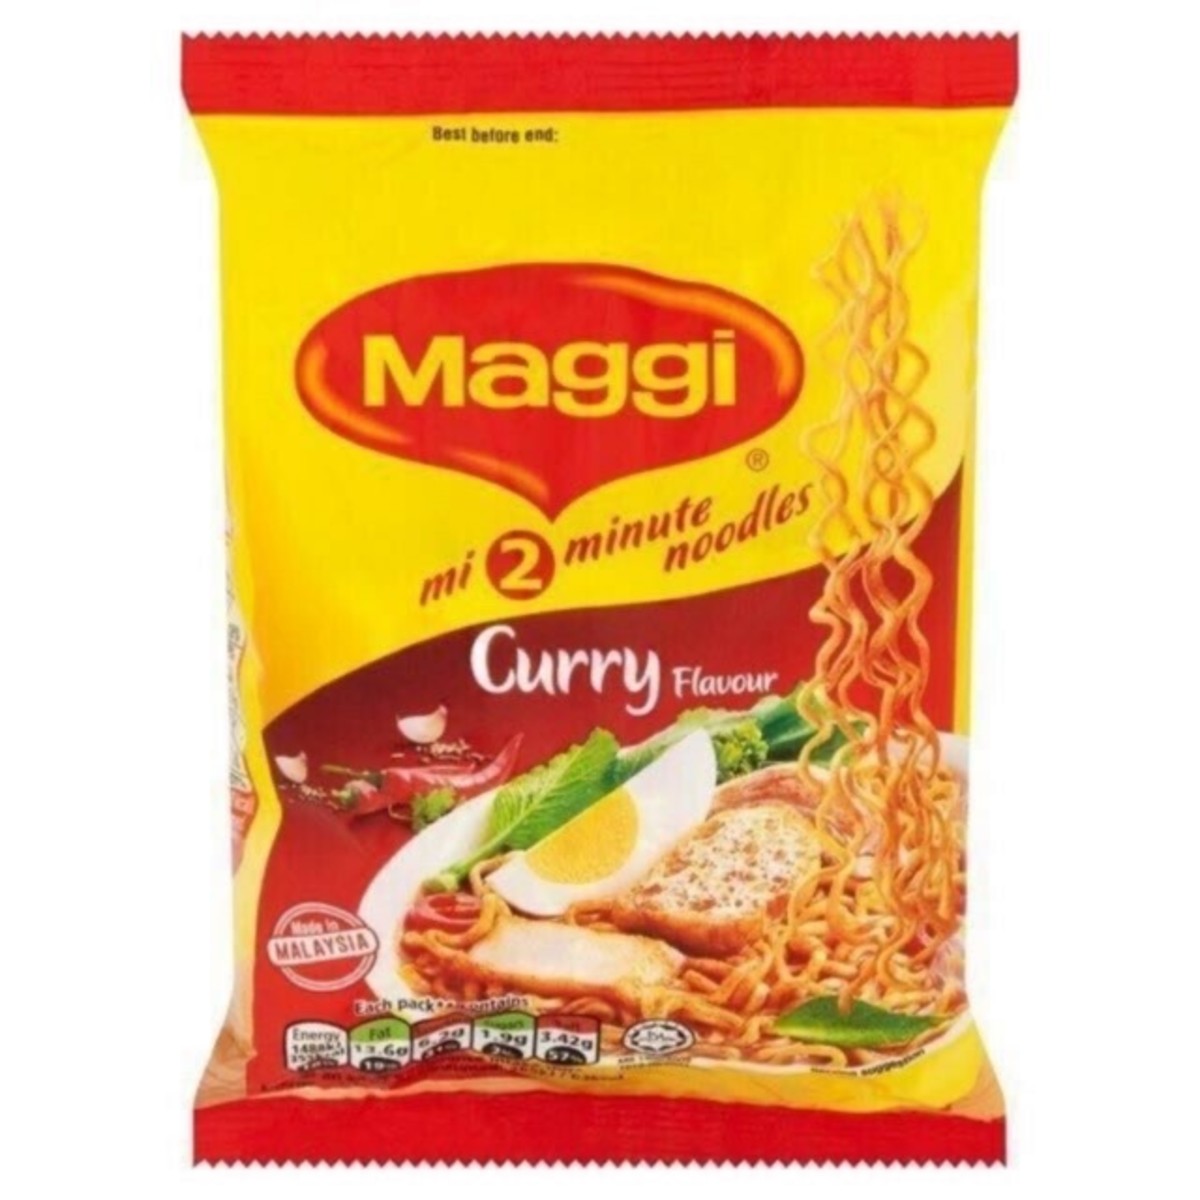 This is the Maggi flavor I use for this recipe.